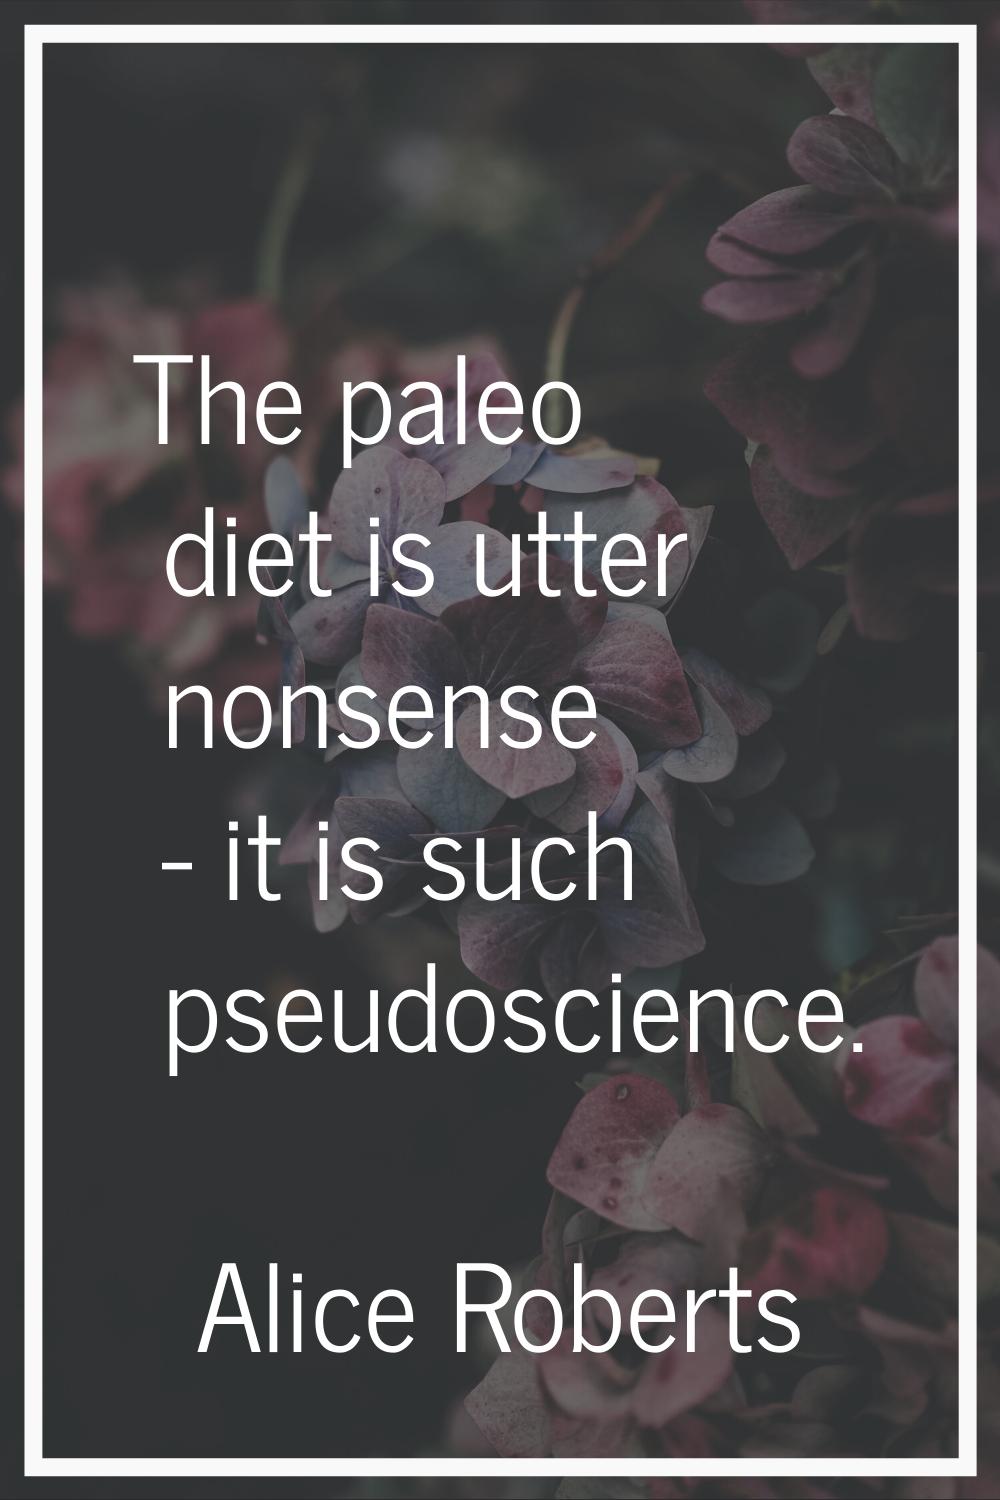 The paleo diet is utter nonsense - it is such pseudoscience.